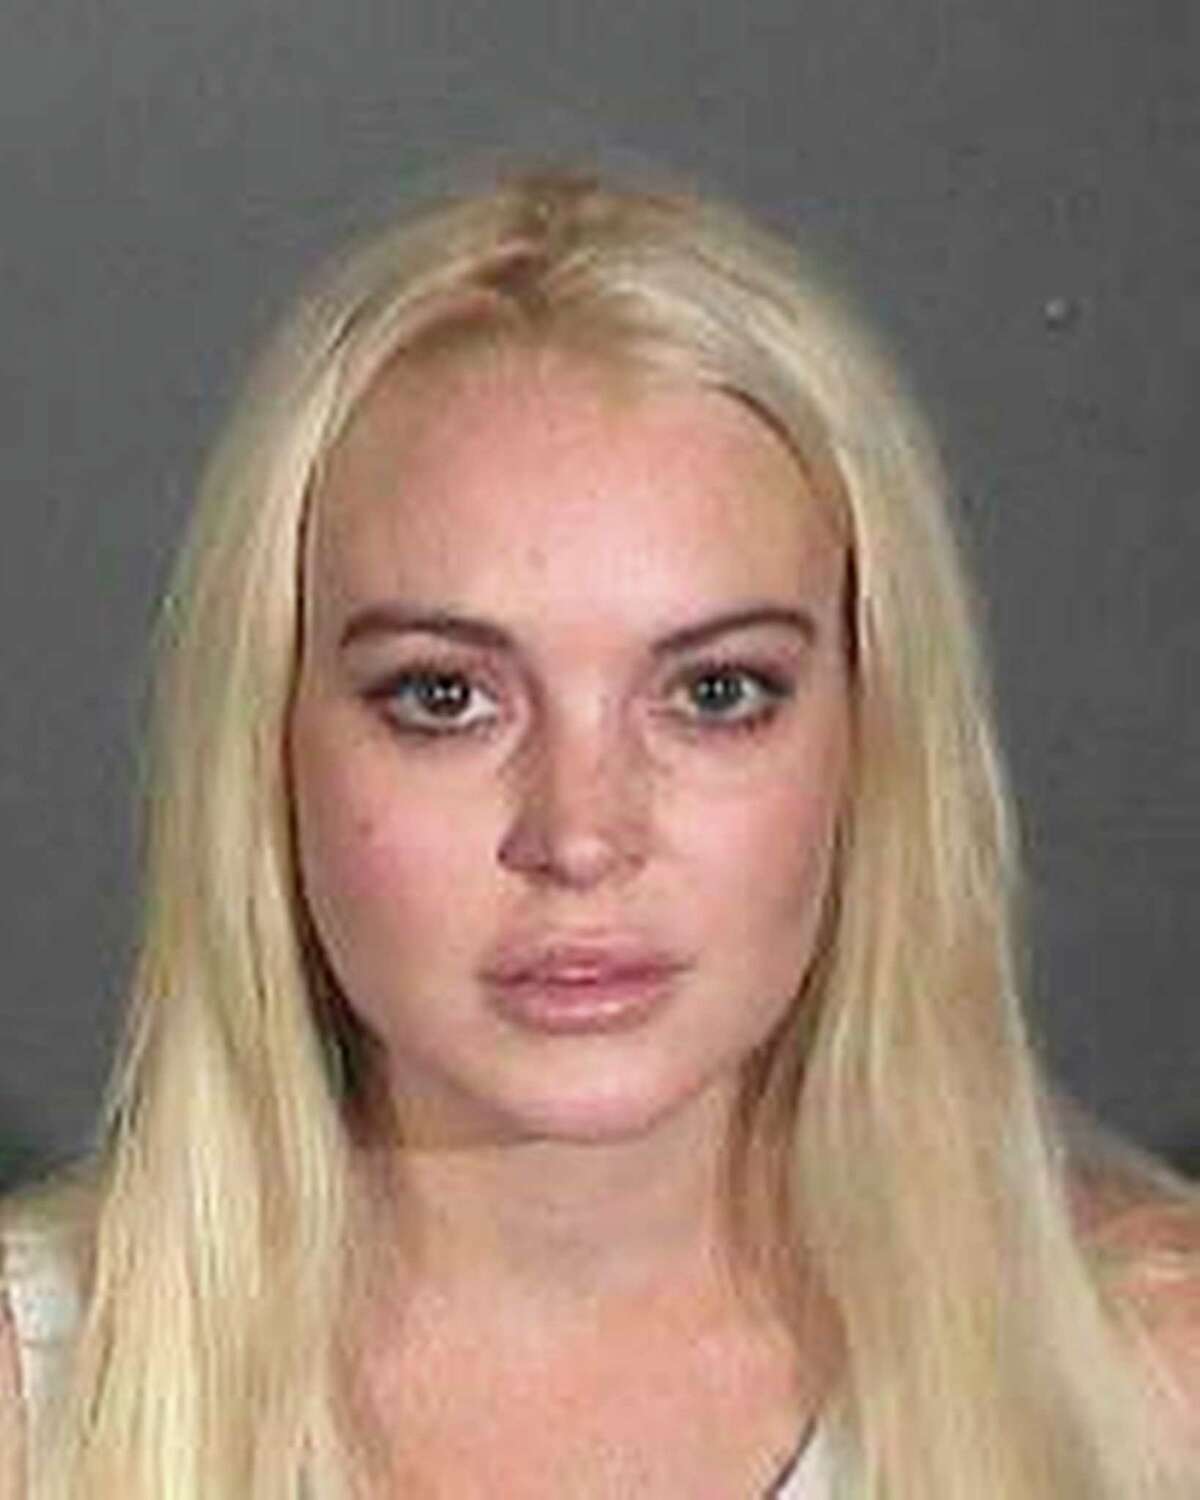 2011: In this booking photo provided by the Los Angeles County Sheriffs Department Actress Lindsay Lohan is shown after she was taken into custody, Wednesday, Oct. 19, 2011. The actress was taken into custody after Superior Court Judge Stephanie Sautner revoked her probation because she was ousted from a community service assignment at a women's shelter.